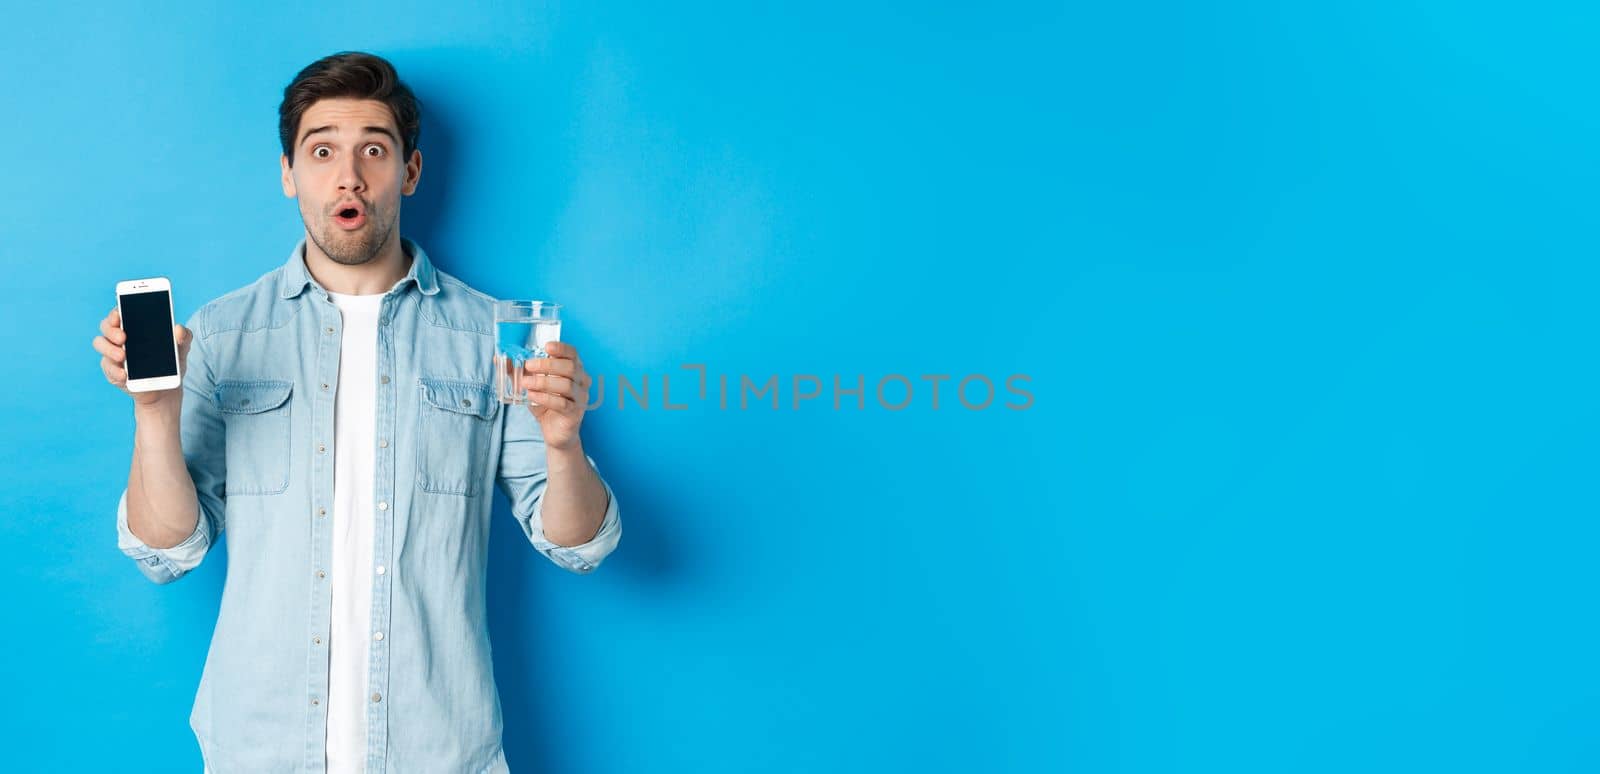 Man looking surprised, showing smartphone screen and glass of water, standing over blue background.